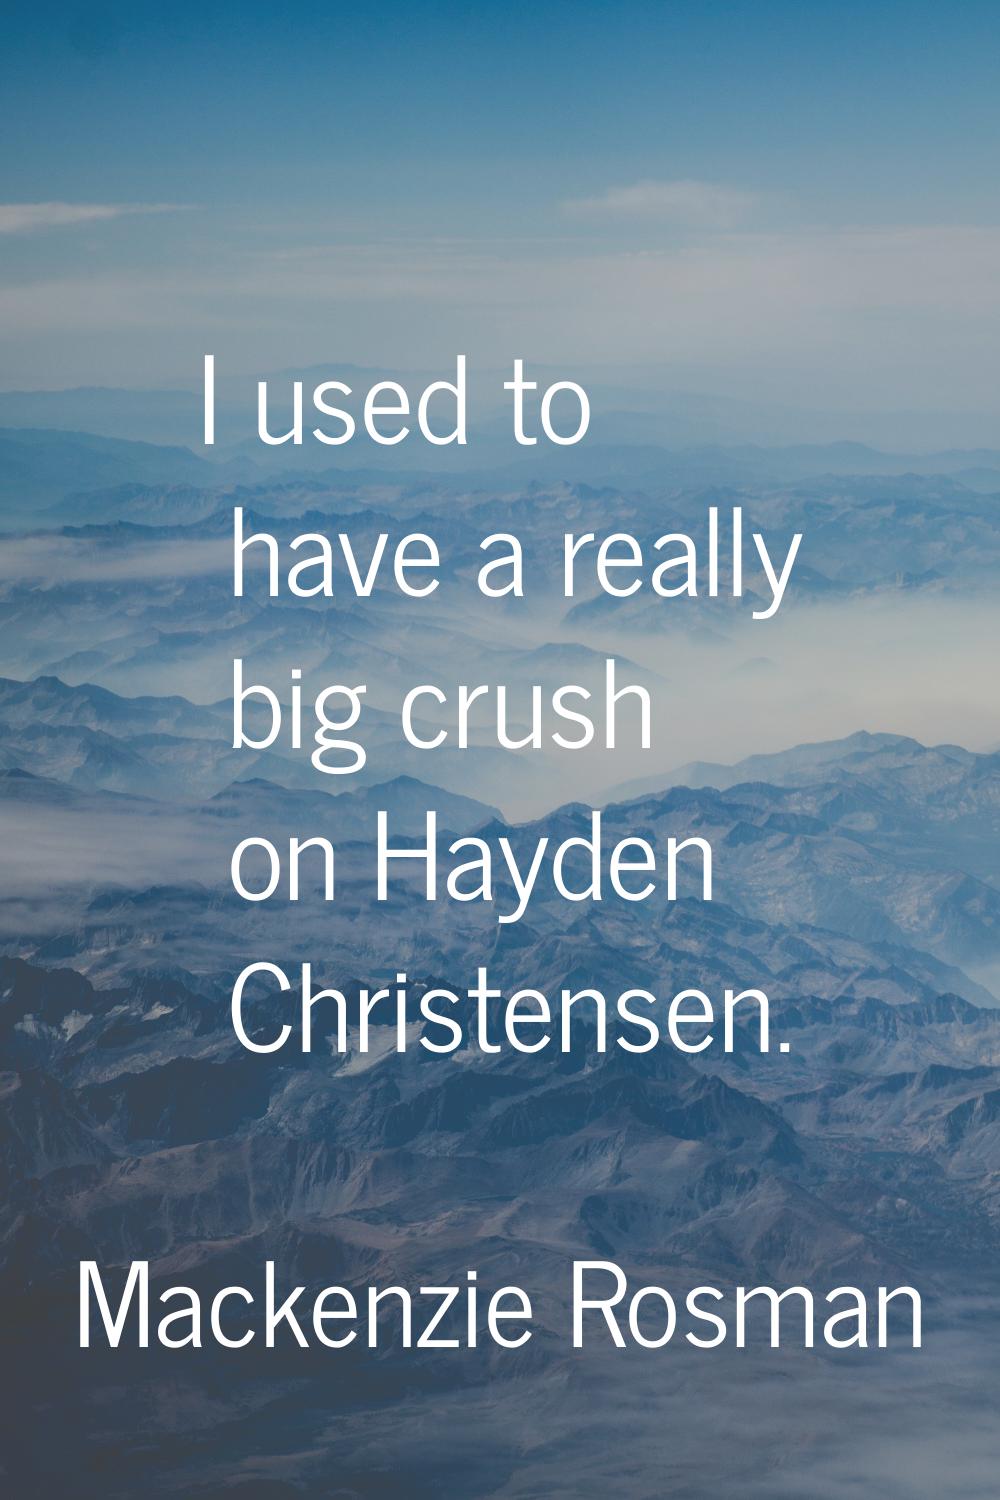 I used to have a really big crush on Hayden Christensen.